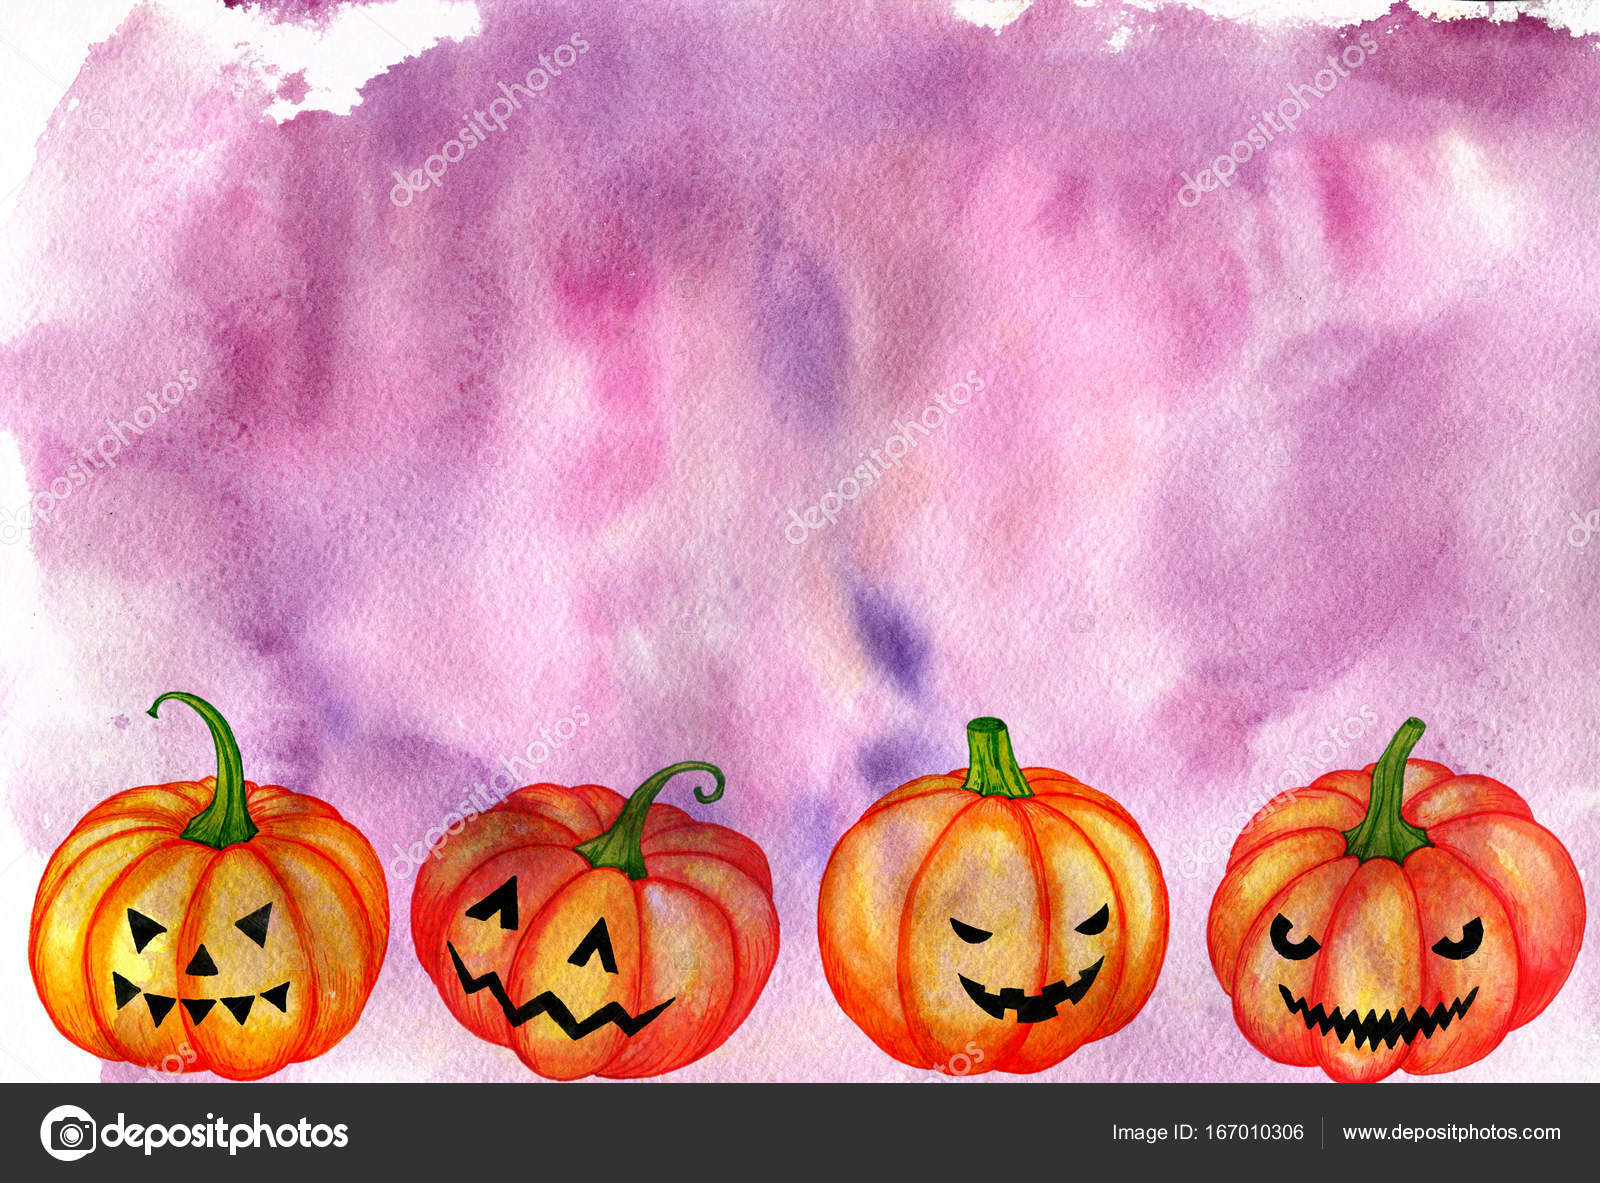 Download Watercolor Halloween Pumpkins Stock Photo Image By C Cat Arch Angel 167010306